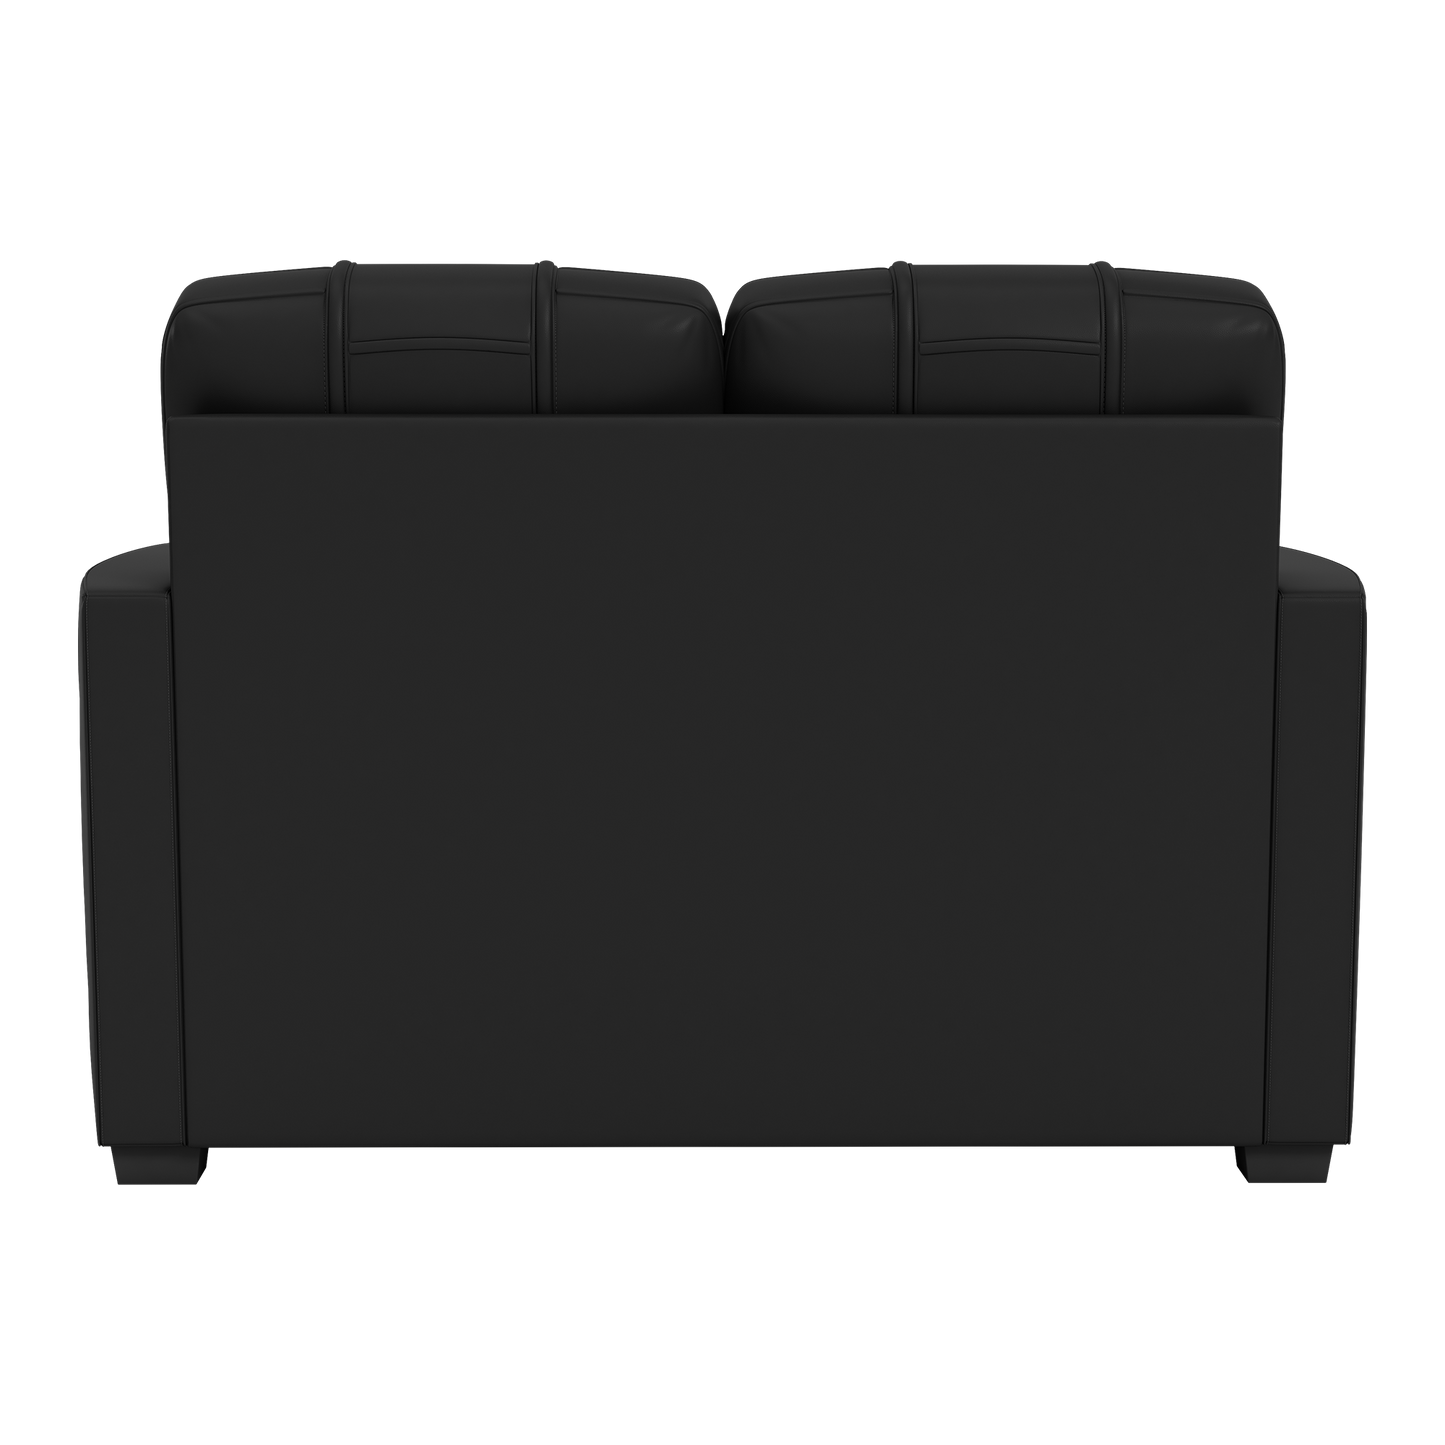 Silver Loveseat with Bucks Gaming Primary Logo [Can Only Be Shipped to Wisconsin]